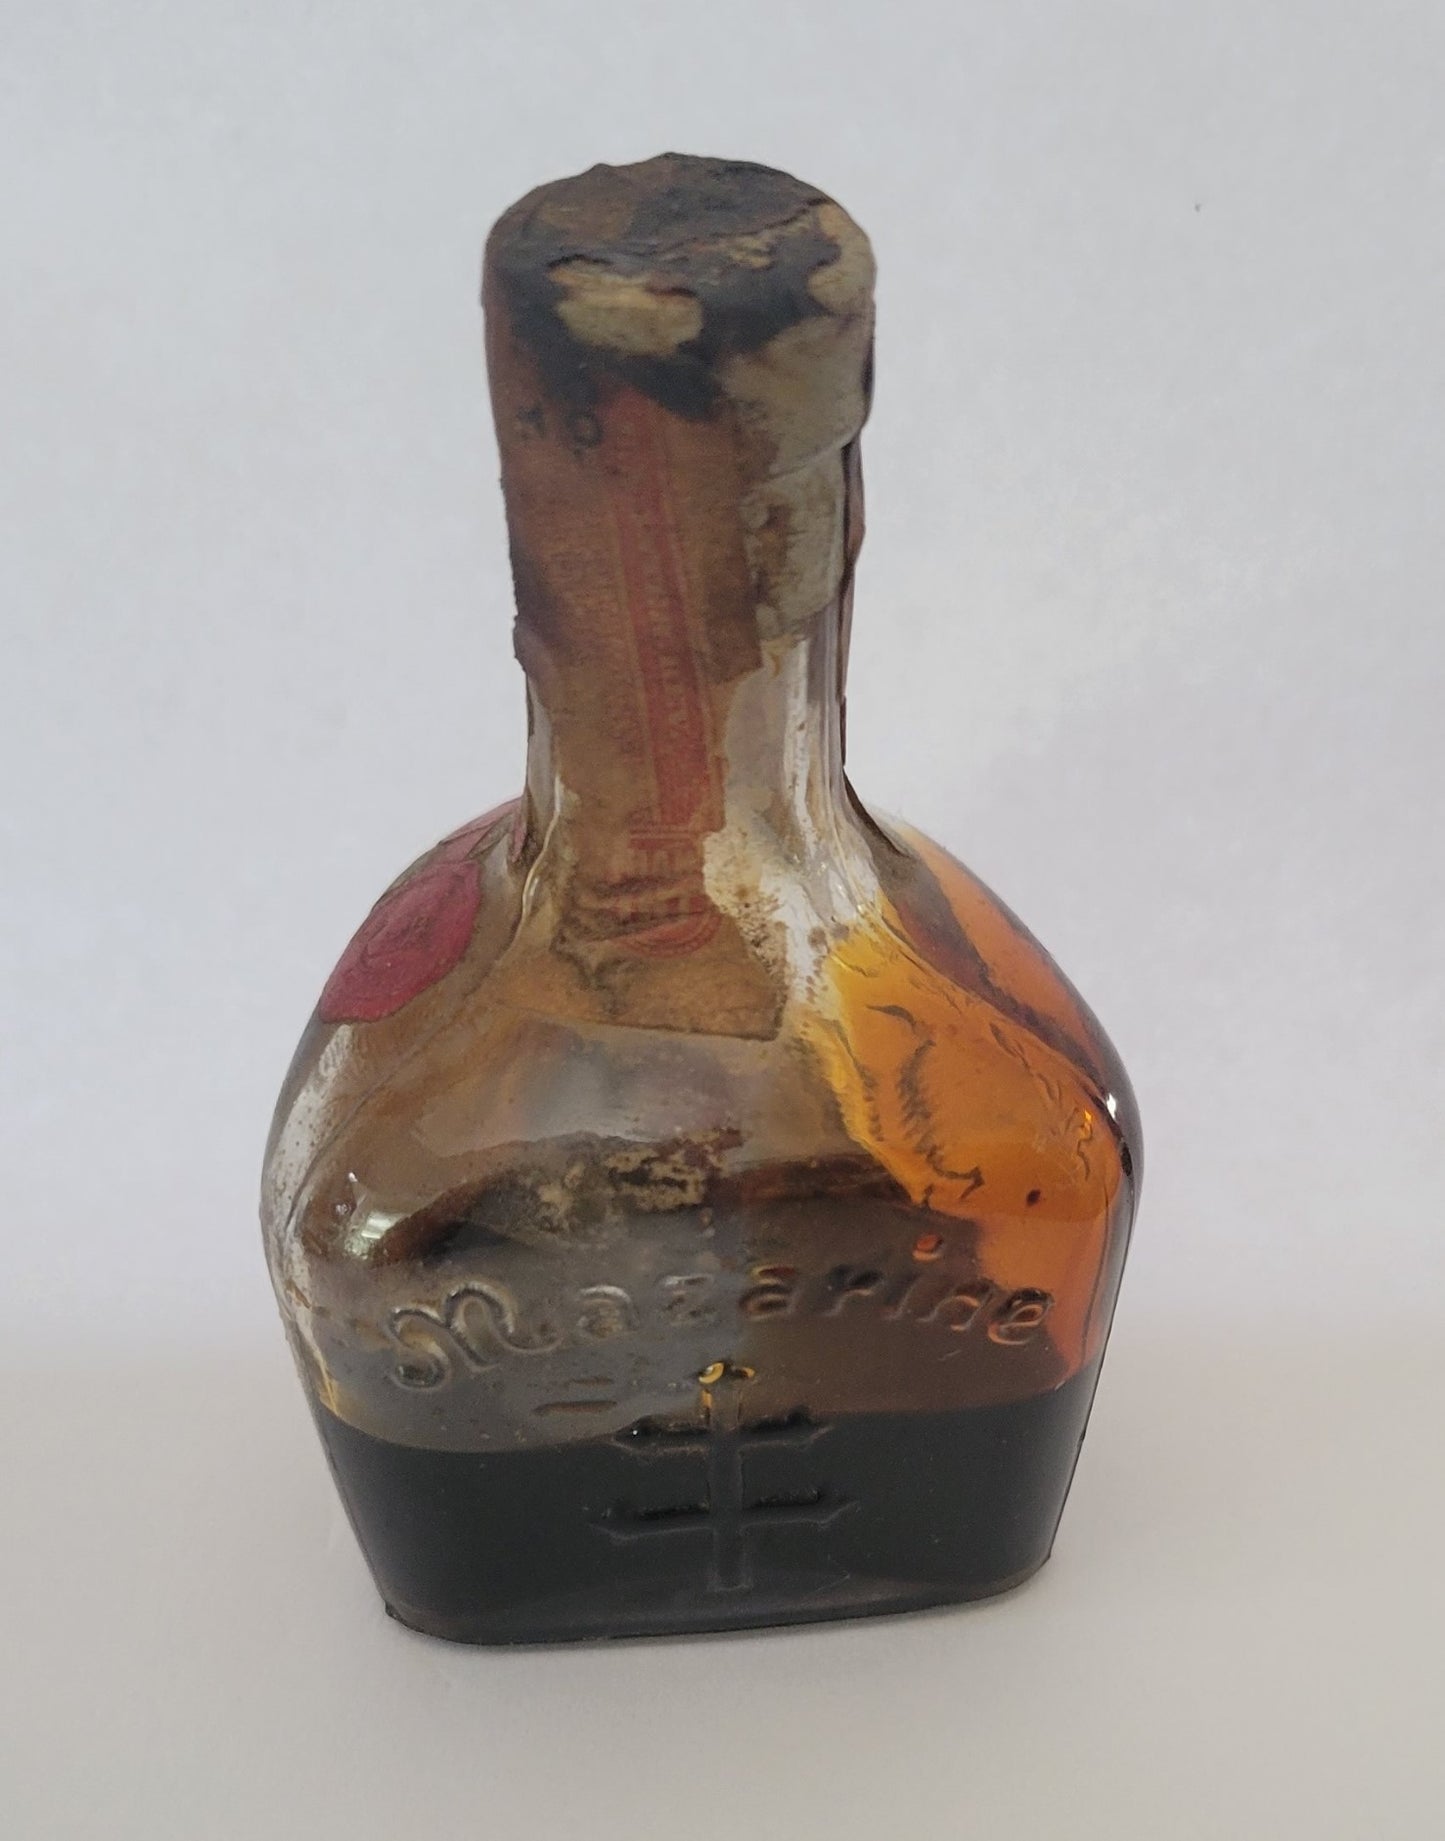 Vintage liquor bottle, little Mazarine liquor bottle from Argentina with State of Maryland Liquor Excise Tax sticker on the front. Second back view.